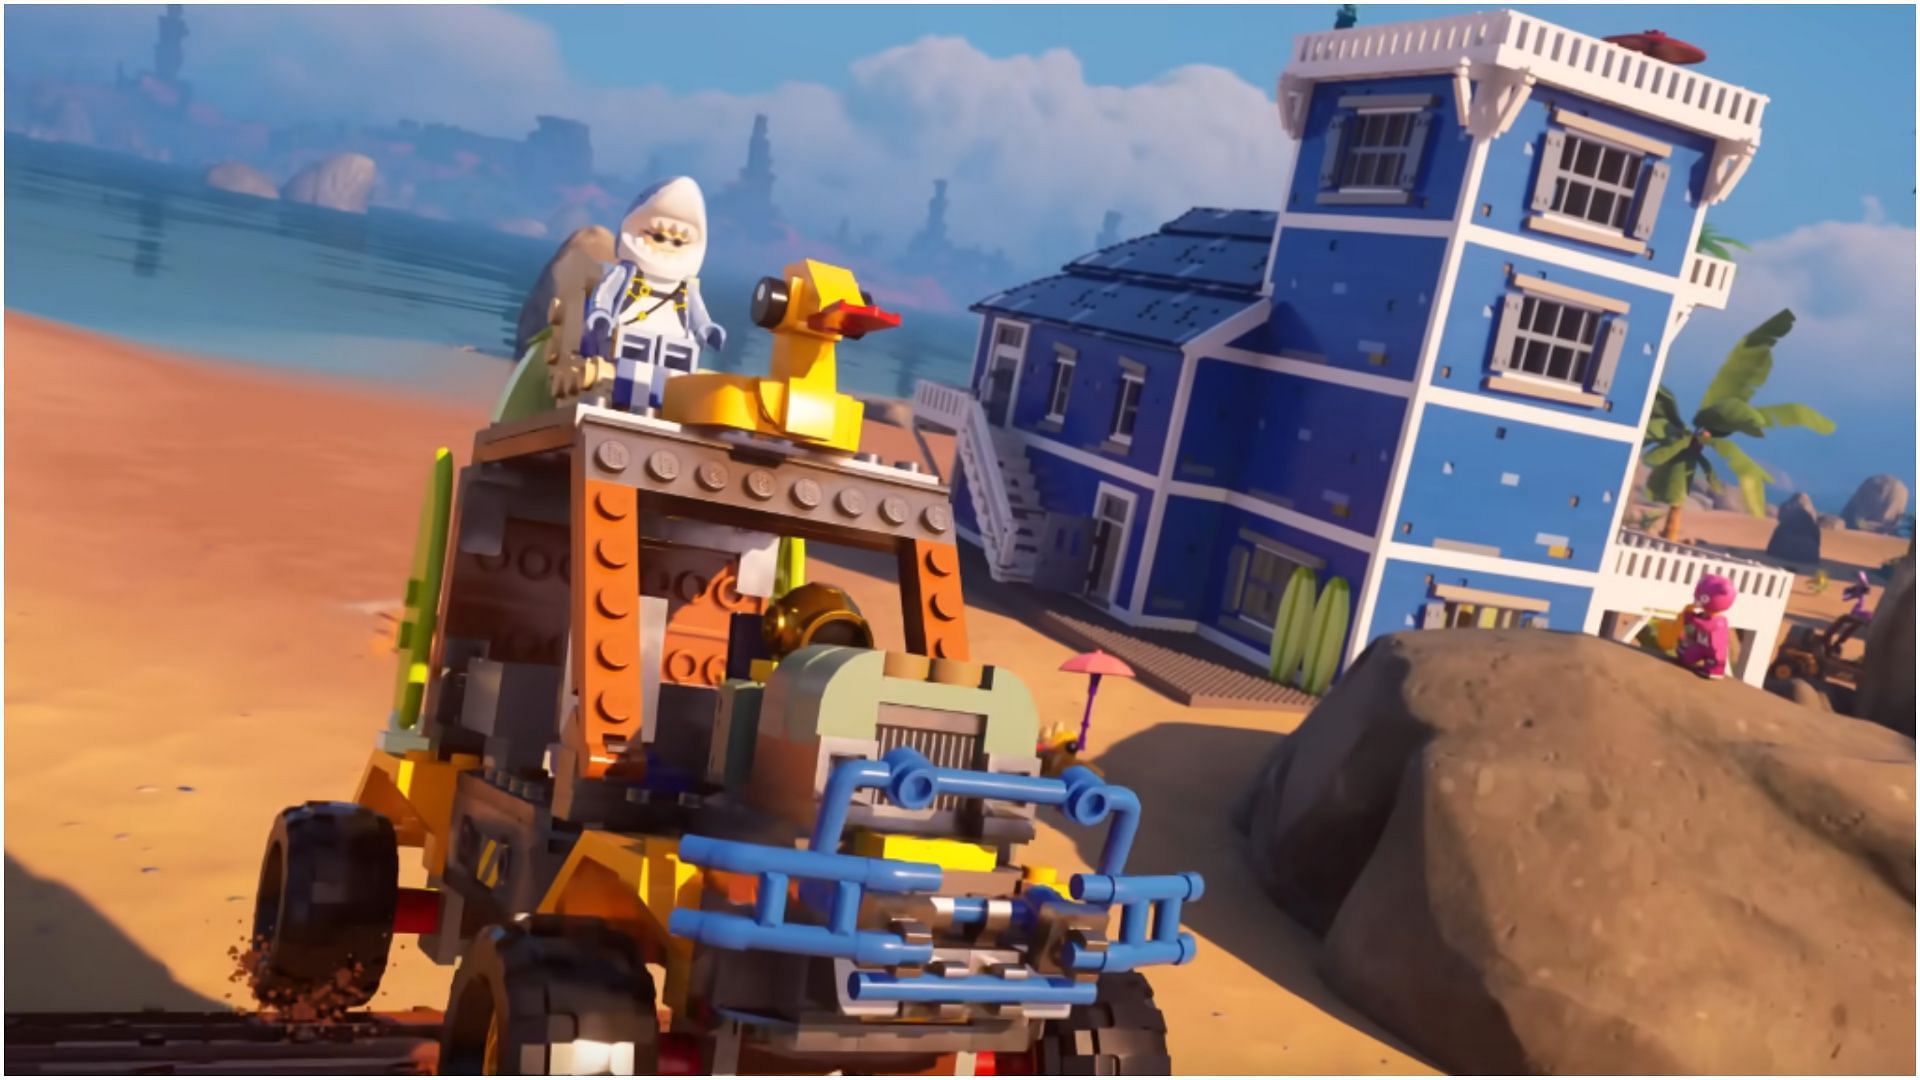 How to build an Offroader in LEGO Fortnite